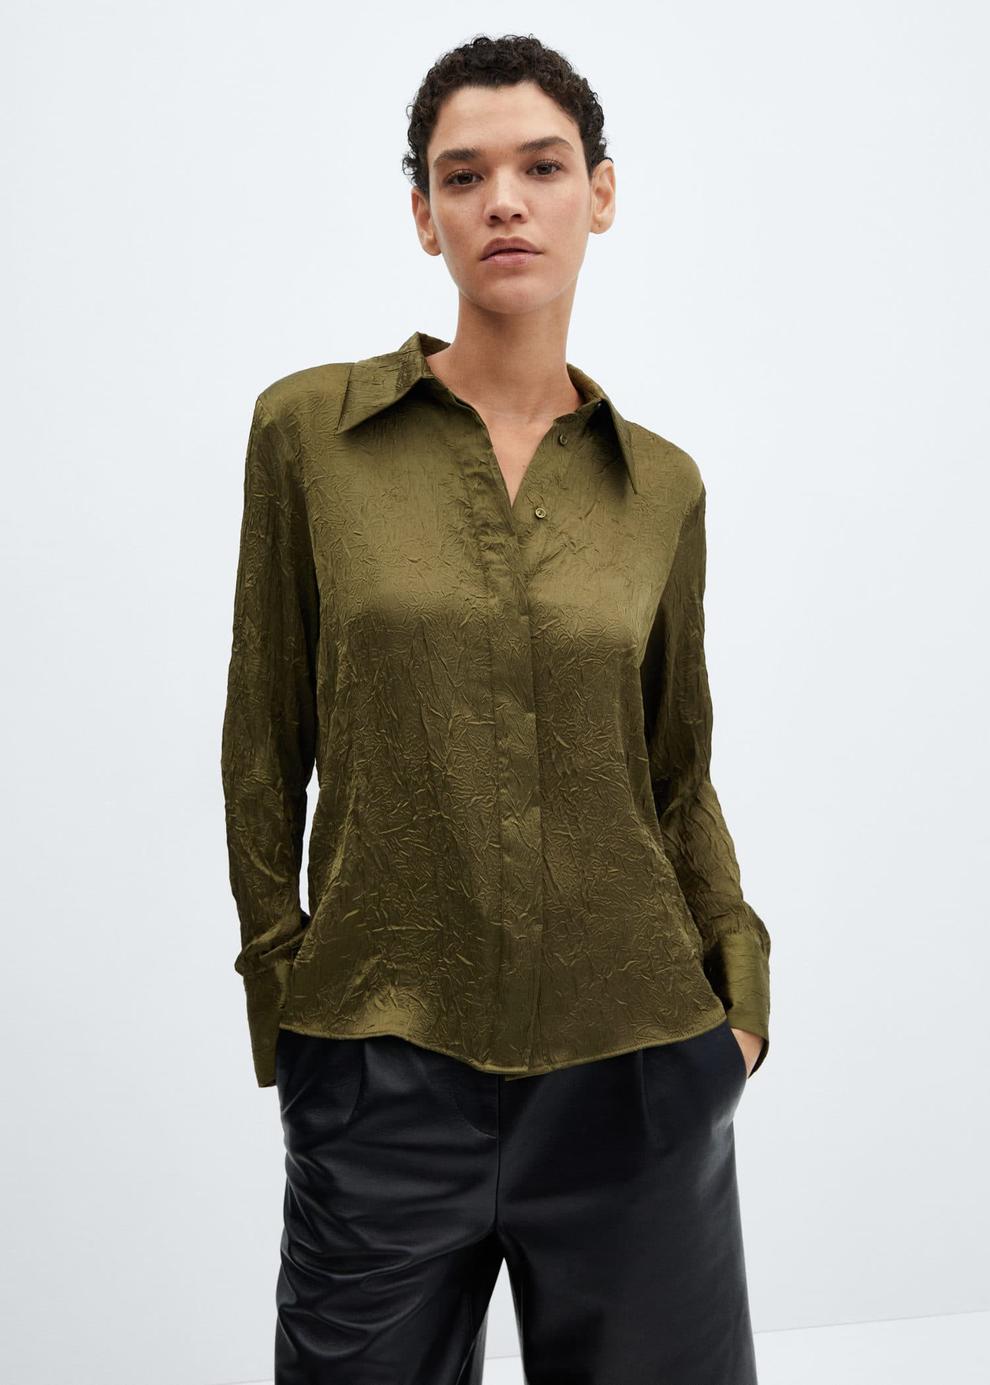 Satin textured shirt offers at S$ 49.9 in Mango